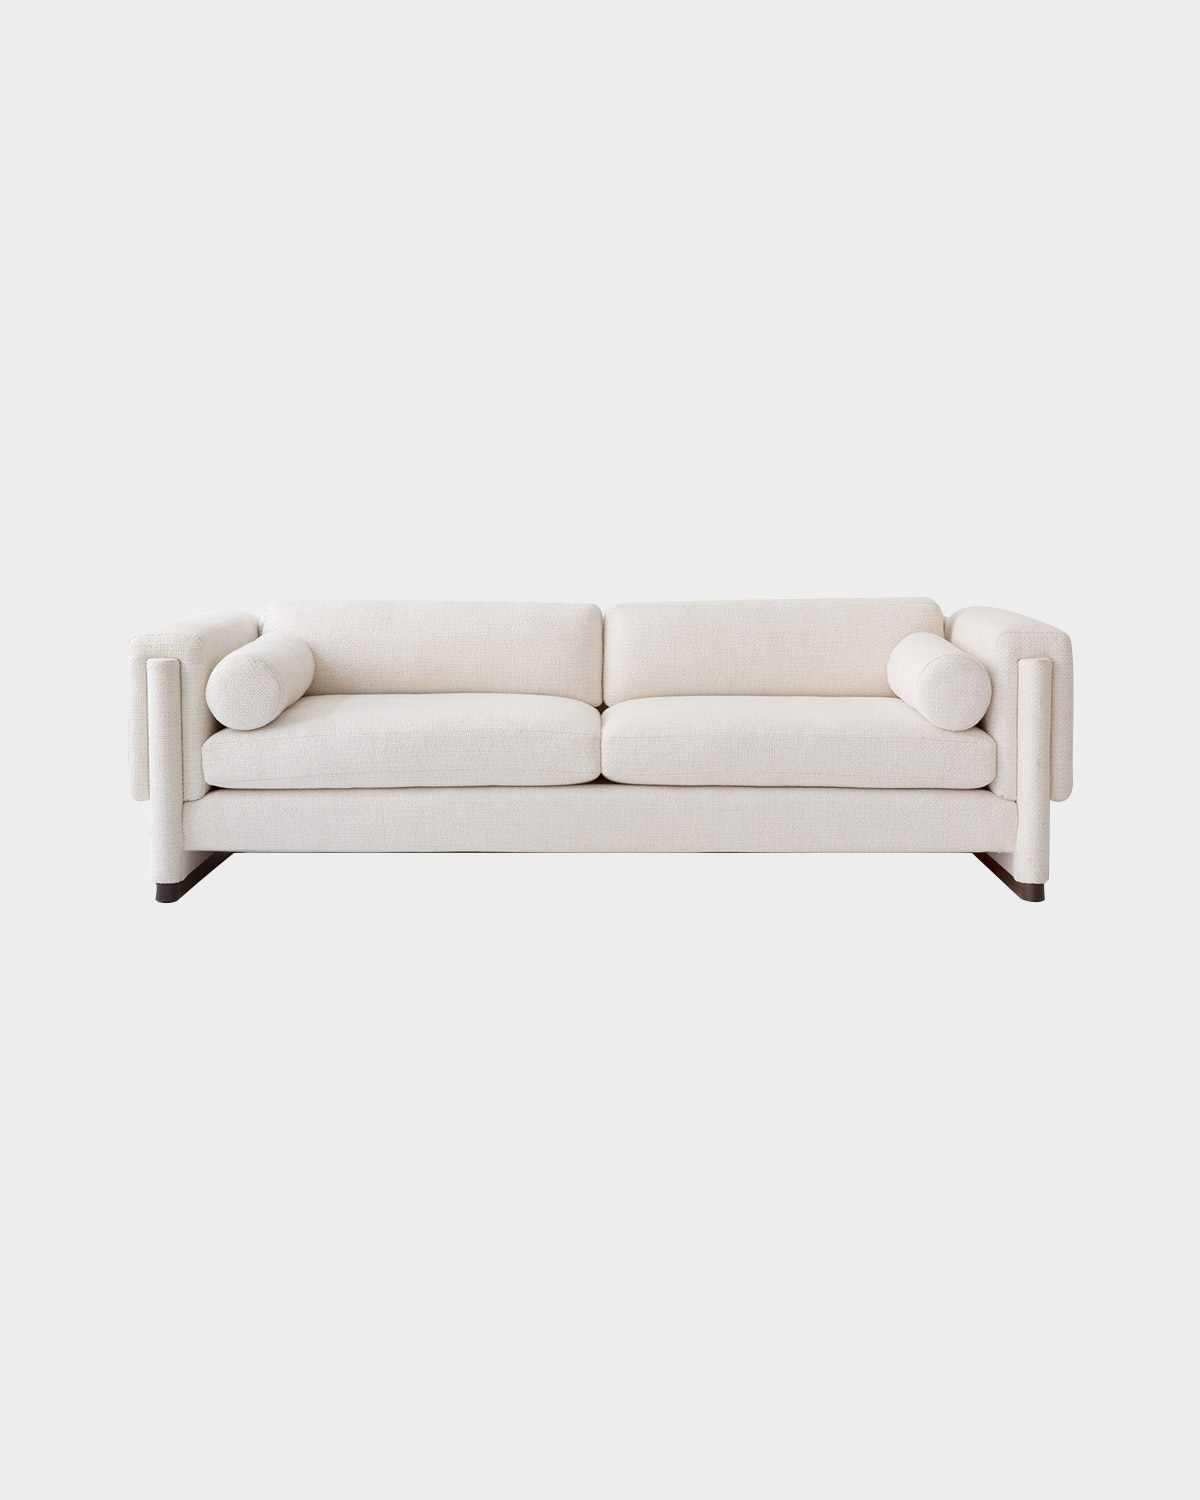 The Howard Sofa by Egg Collective